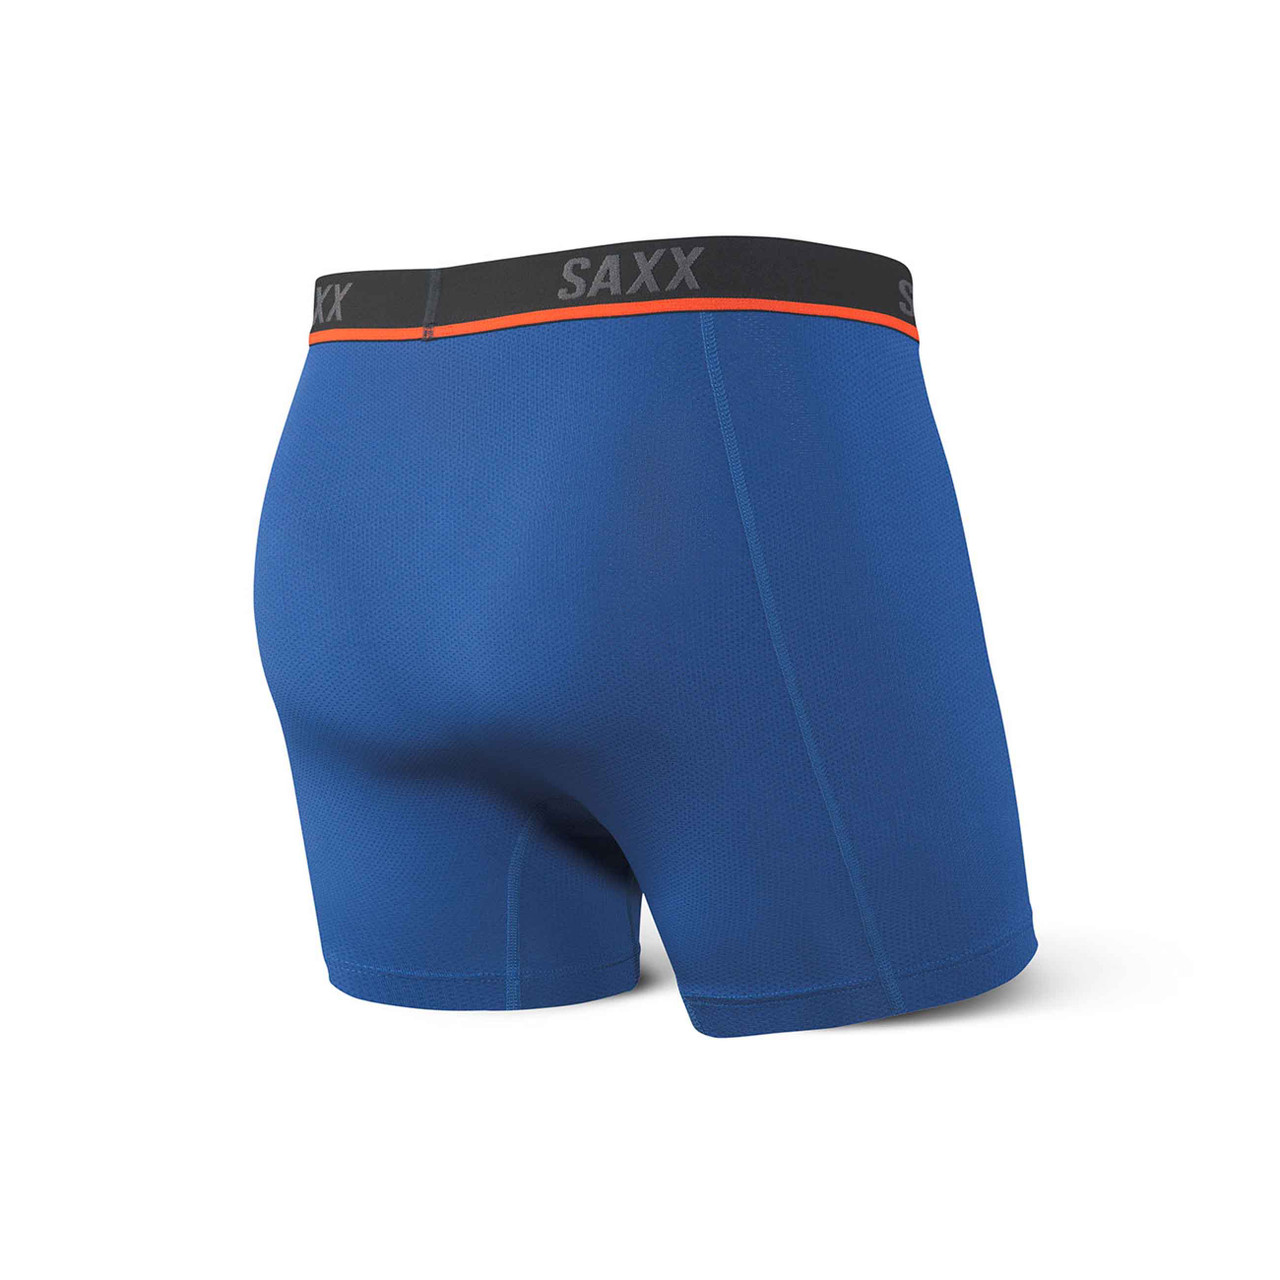 SAXX Kinetic HD Sport Boxer Brief City Blue - Hyped Sports